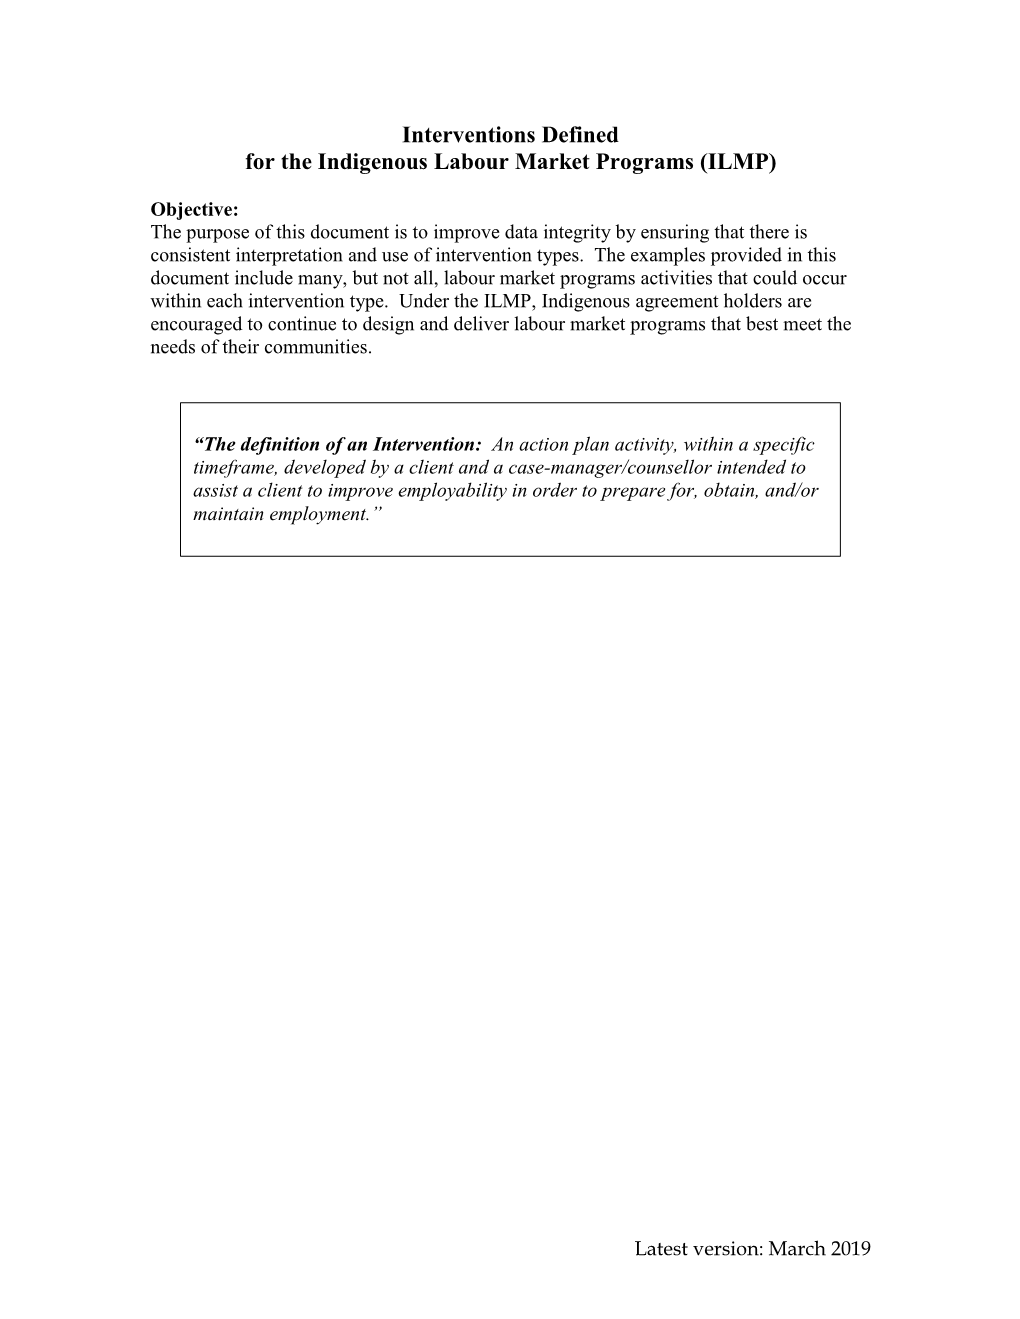 Interventions Defined for the Indigenous Labour Market Programs (ILMP)